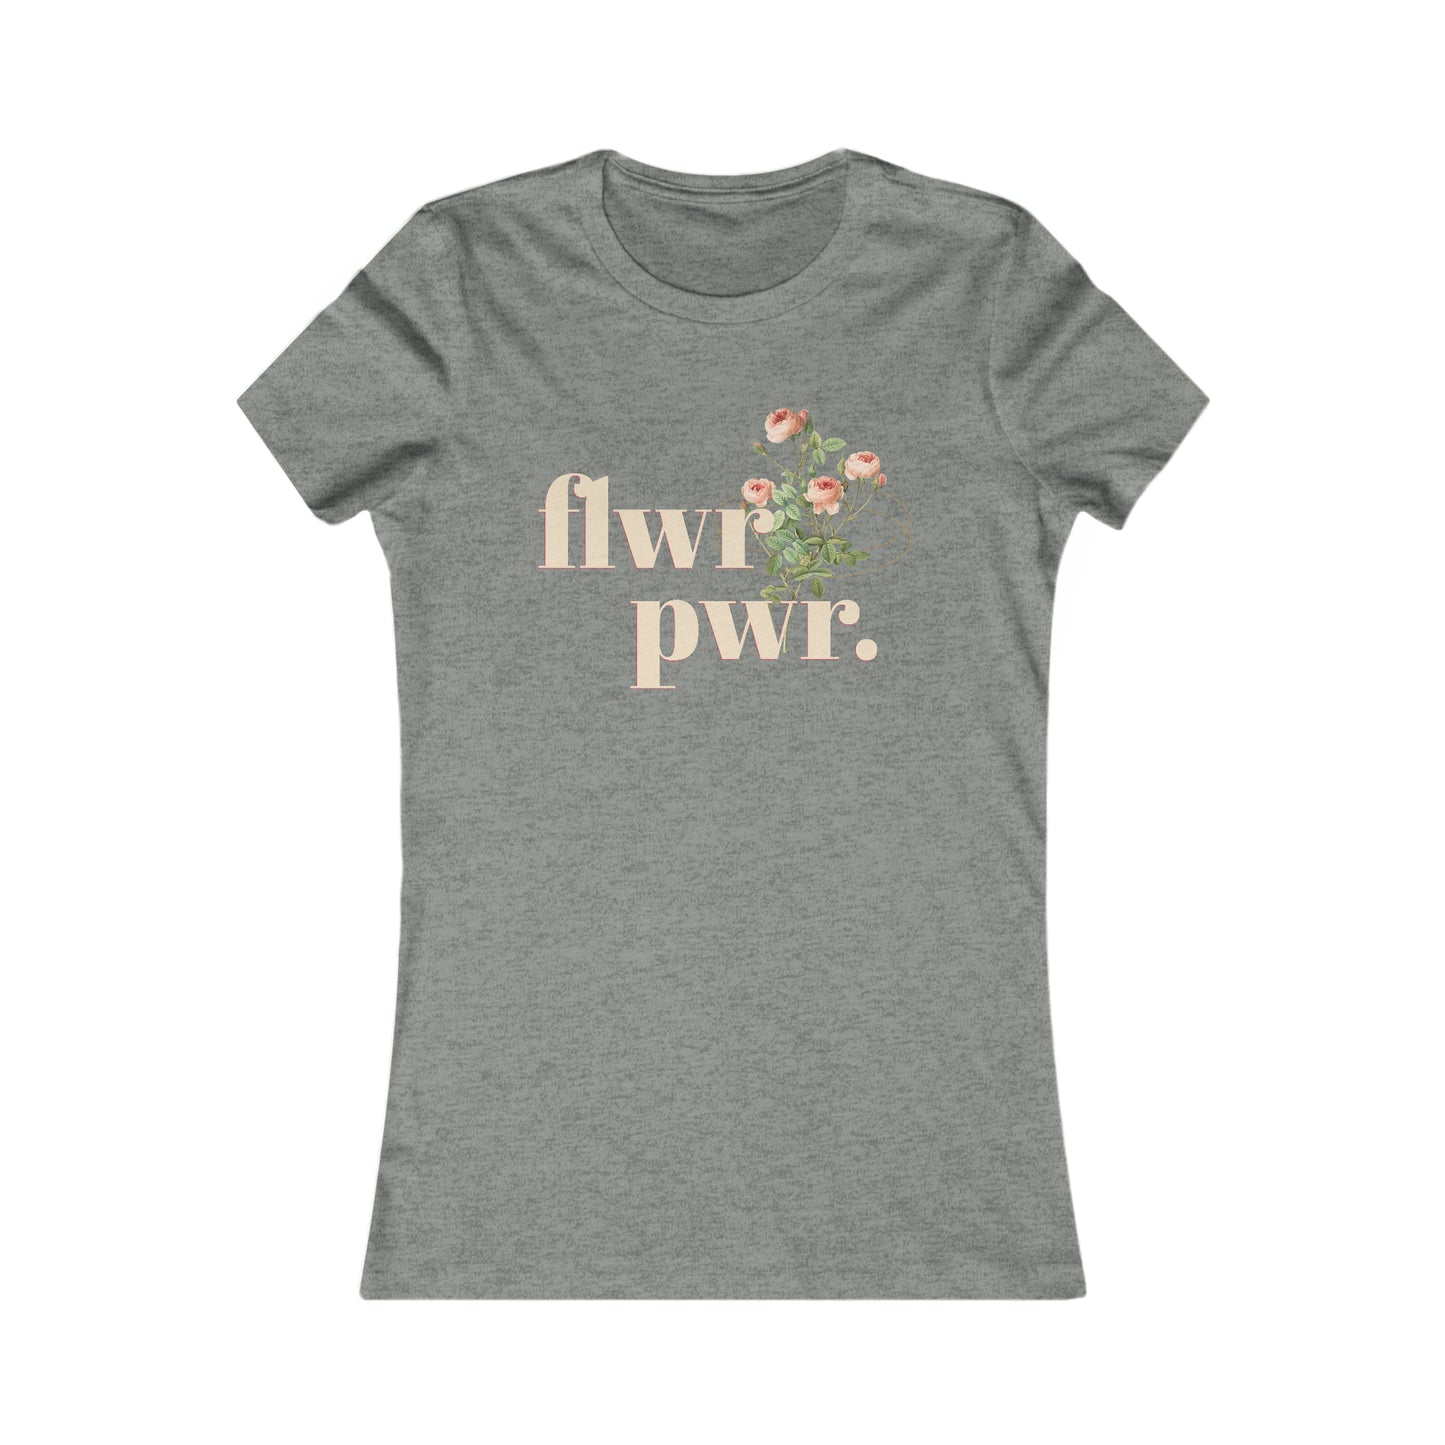 flwr pwr graphic tee